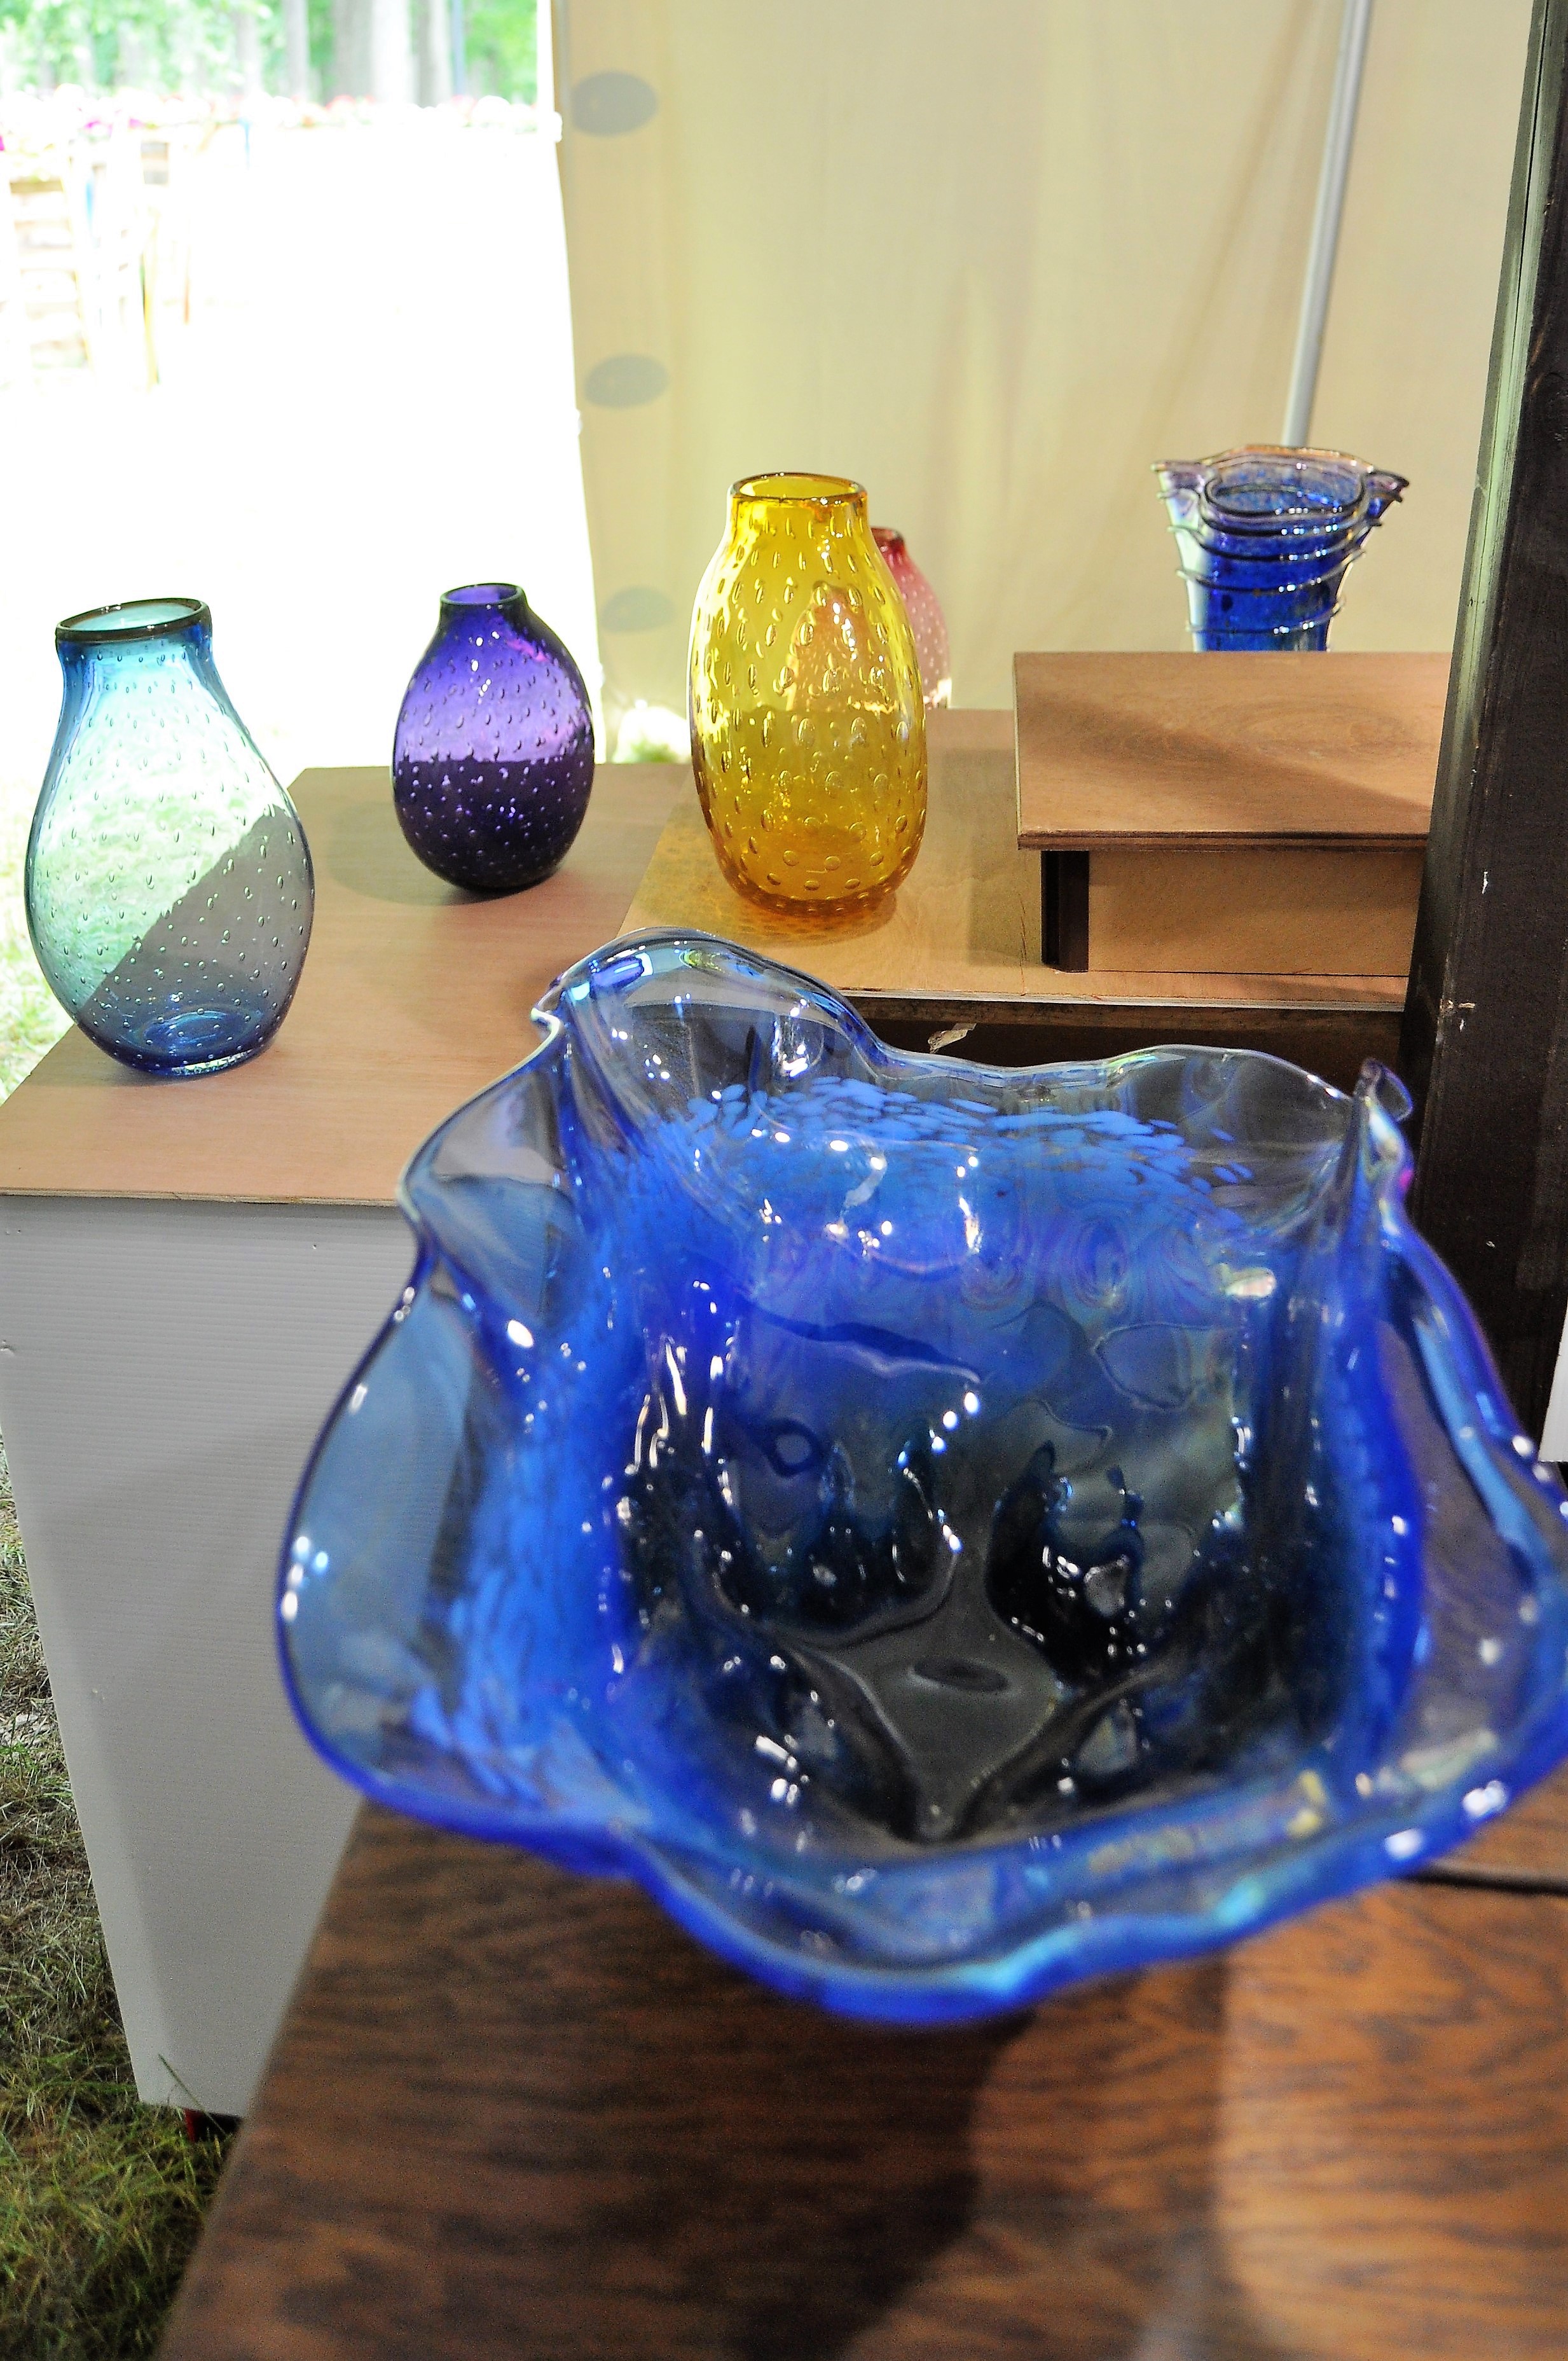 Pieces of glass art work including a large blue bowl with three vases behind it in varying colors